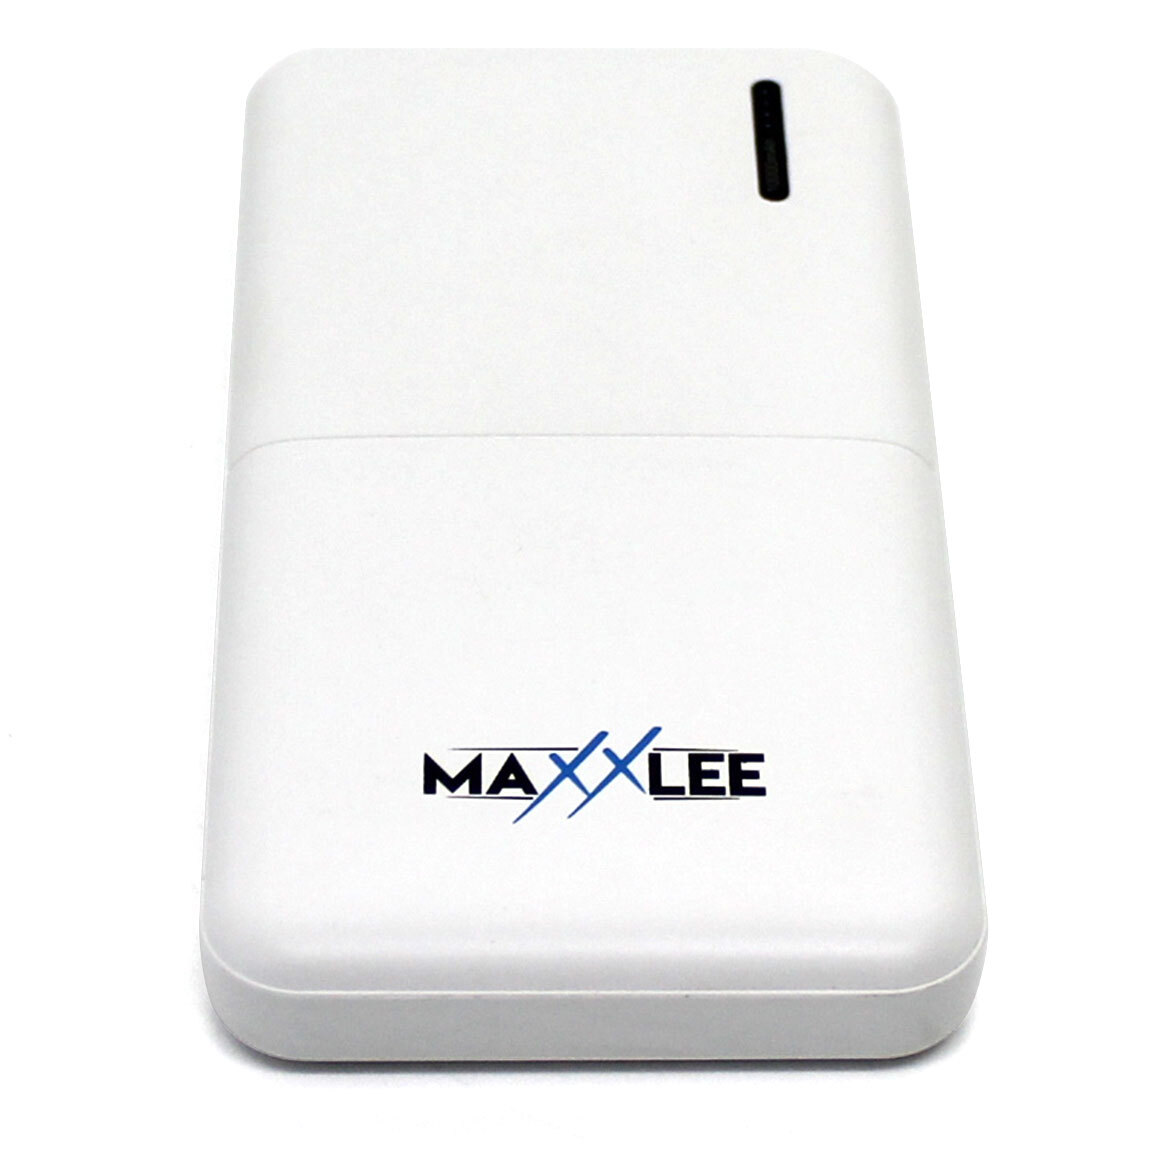 Maxxlee 10000mAh Power Bank Dual USB External Portable Battery Charger IPhone Android Mobile WHITE